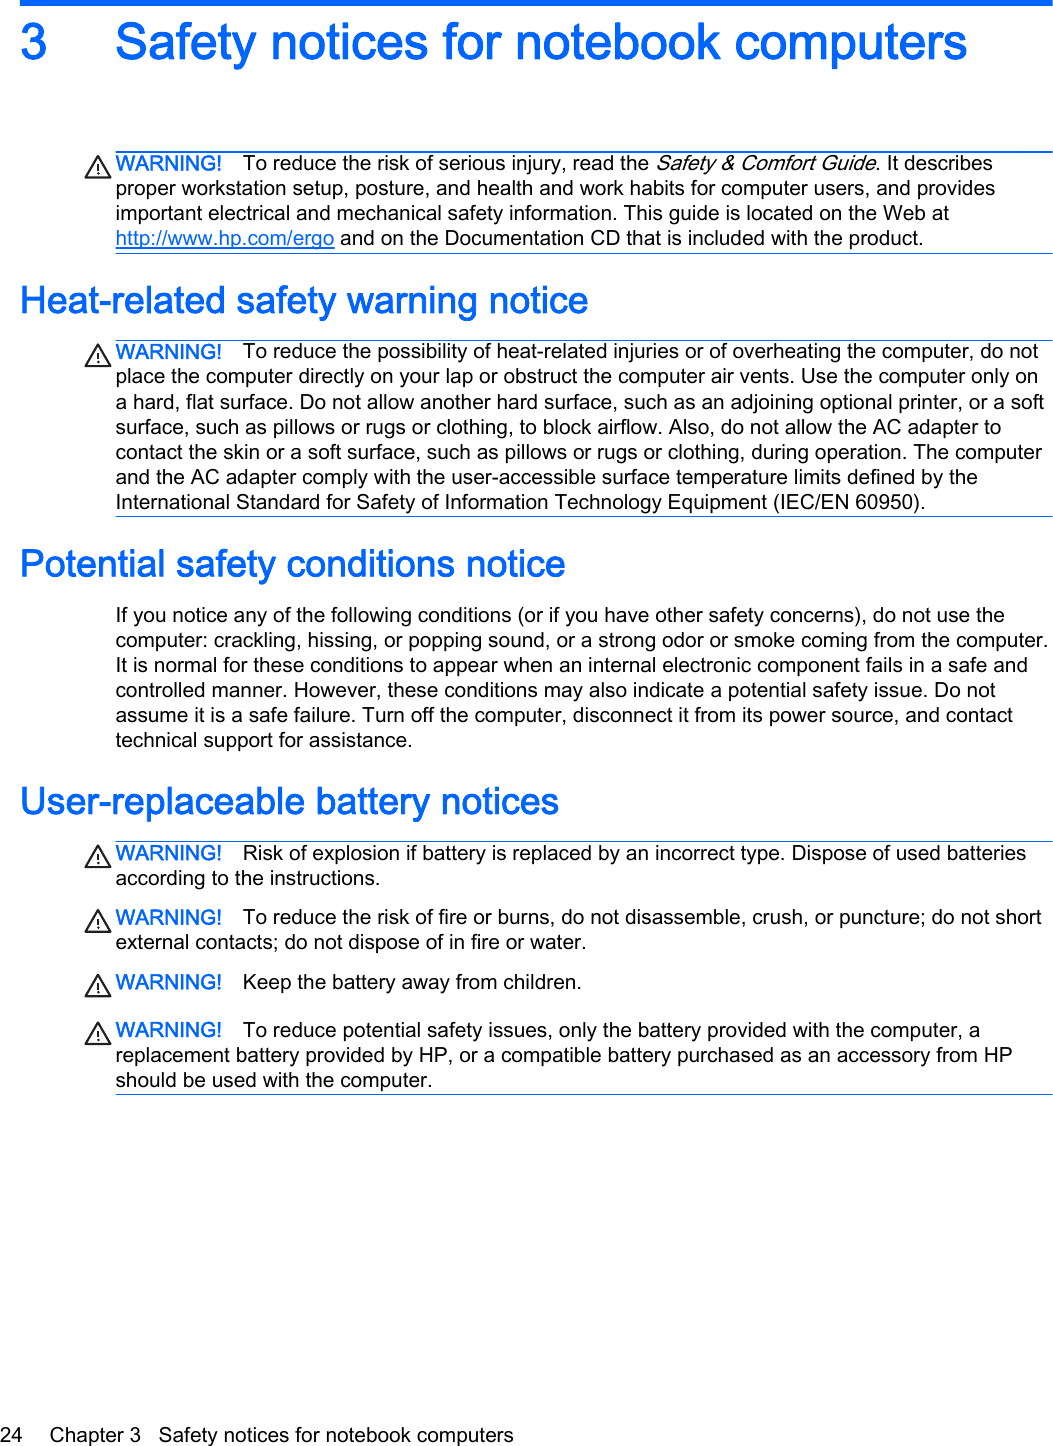 3 Safety notices for notebook computersWARNING! To reduce the risk of serious injury, read the Safety &amp; Comfort Guide. It describesproper workstation setup, posture, and health and work habits for computer users, and providesimportant electrical and mechanical safety information. This guide is located on the Web athttp://www.hp.com/ergo and on the Documentation CD that is included with the product.Heat-related safety warning noticeWARNING! To reduce the possibility of heat-related injuries or of overheating the computer, do notplace the computer directly on your lap or obstruct the computer air vents. Use the computer only ona hard, flat surface. Do not allow another hard surface, such as an adjoining optional printer, or a softsurface, such as pillows or rugs or clothing, to block airflow. Also, do not allow the AC adapter tocontact the skin or a soft surface, such as pillows or rugs or clothing, during operation. The computerand the AC adapter comply with the user-accessible surface temperature limits defined by theInternational Standard for Safety of Information Technology Equipment (IEC/EN 60950).Potential safety conditions noticeIf you notice any of the following conditions (or if you have other safety concerns), do not use thecomputer: crackling, hissing, or popping sound, or a strong odor or smoke coming from the computer.It is normal for these conditions to appear when an internal electronic component fails in a safe andcontrolled manner. However, these conditions may also indicate a potential safety issue. Do notassume it is a safe failure. Turn off the computer, disconnect it from its power source, and contacttechnical support for assistance.User-replaceable battery noticesWARNING! Risk of explosion if battery is replaced by an incorrect type. Dispose of used batteriesaccording to the instructions.WARNING! To reduce the risk of fire or burns, do not disassemble, crush, or puncture; do not shortexternal contacts; do not dispose of in fire or water.WARNING! Keep the battery away from children.WARNING! To reduce potential safety issues, only the battery provided with the computer, areplacement battery provided by HP, or a compatible battery purchased as an accessory from HPshould be used with the computer.24 Chapter 3   Safety notices for notebook computers